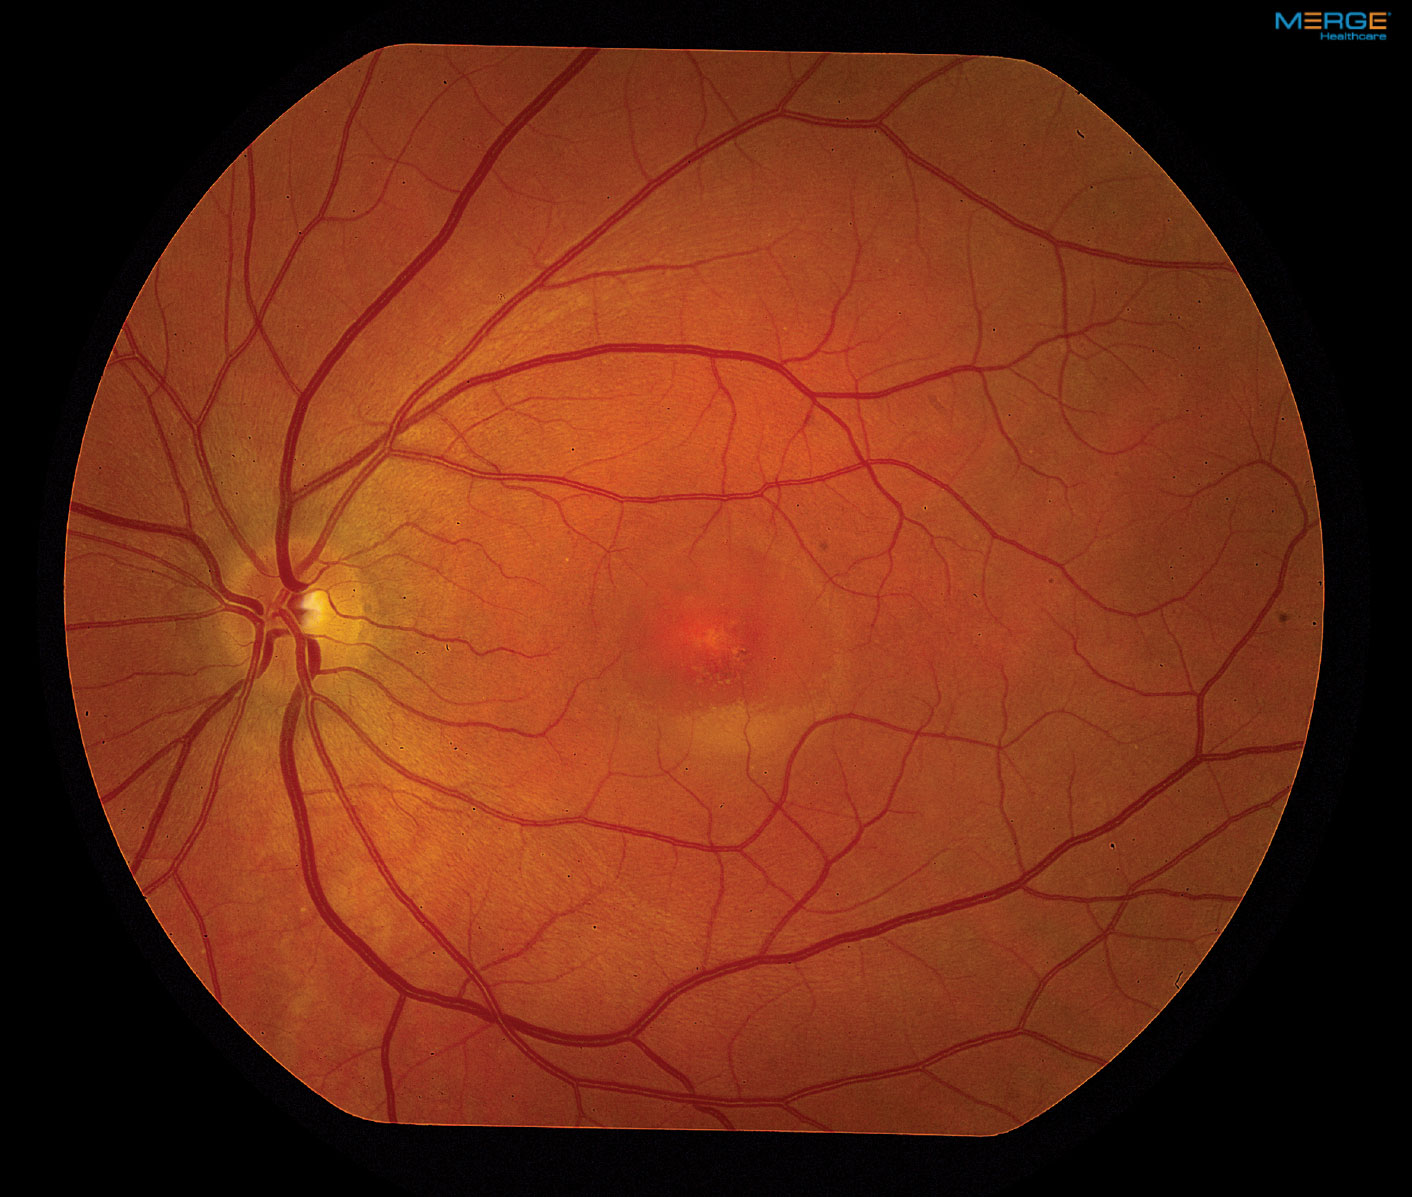 Our patient’s fundus photos reveal changes in the left macula.